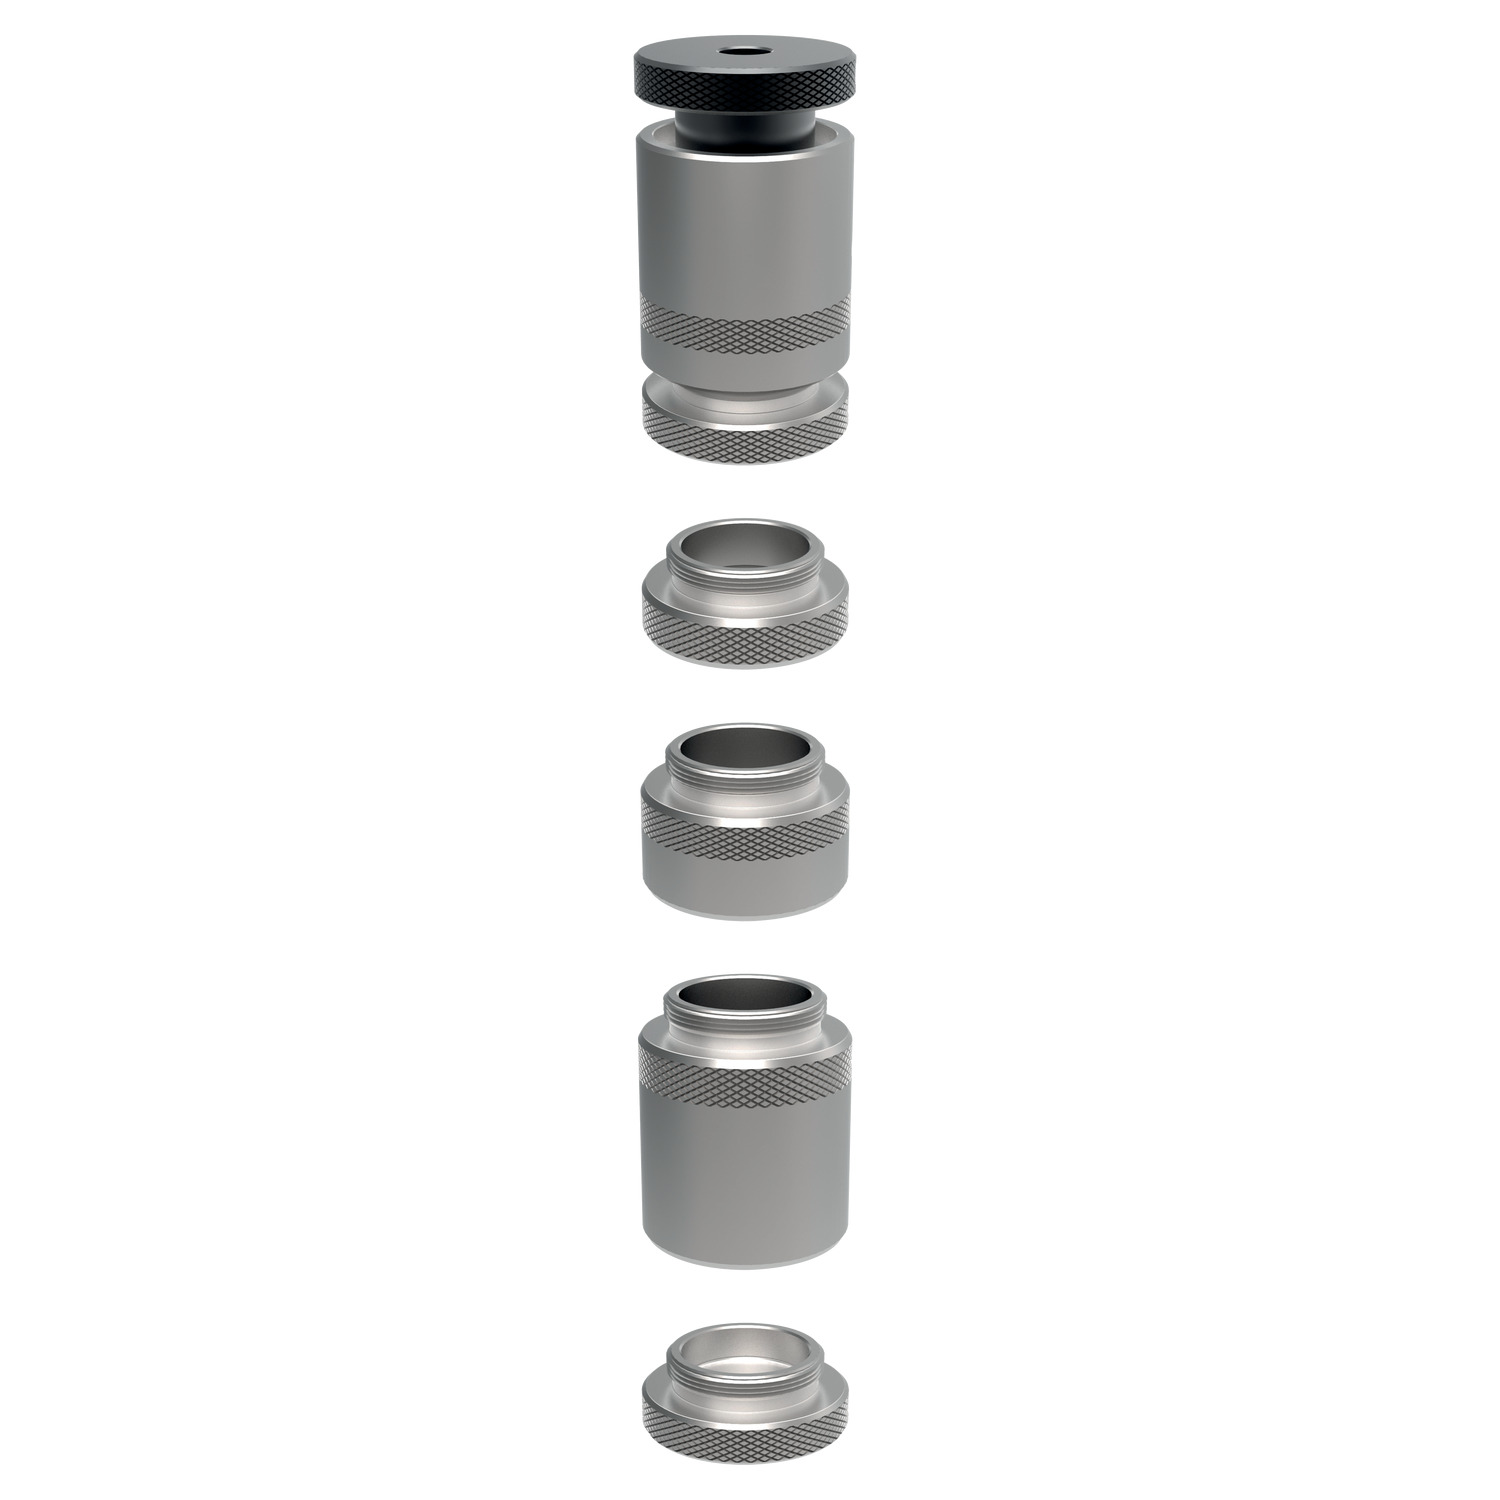 Aluminium Screw Jacks Our aluminium screw jacks allow individual parts to be combined to create screw jacks of varying heights.